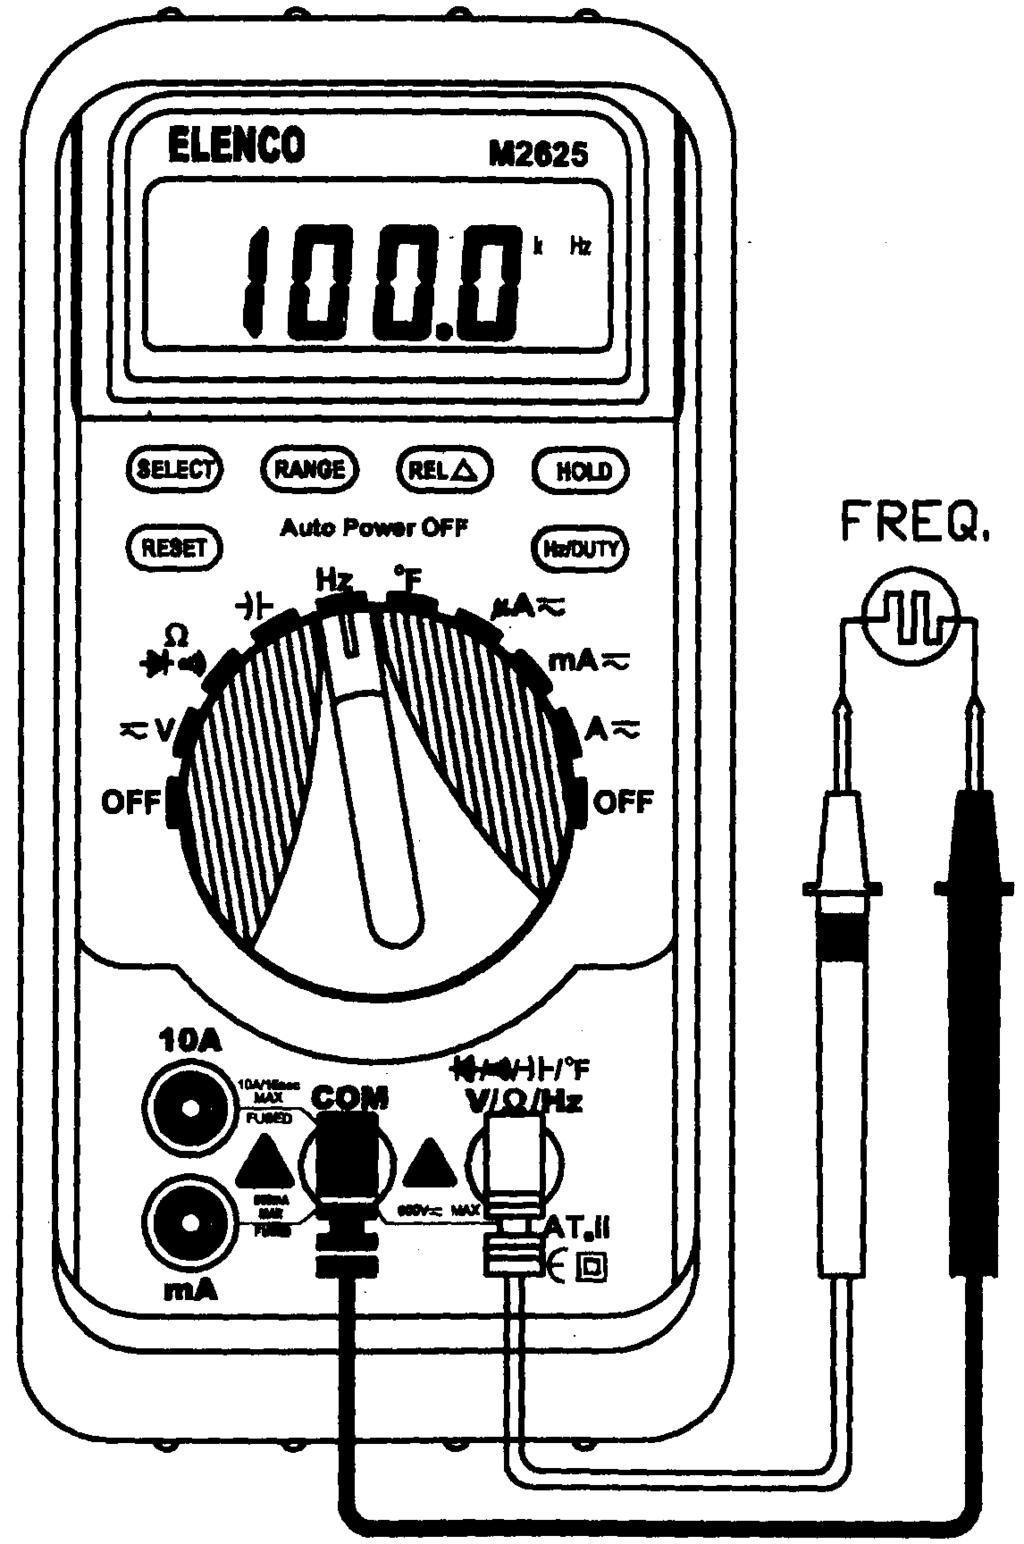 Measuring Frequency Frequency is the number of cycles a signal completes each second.